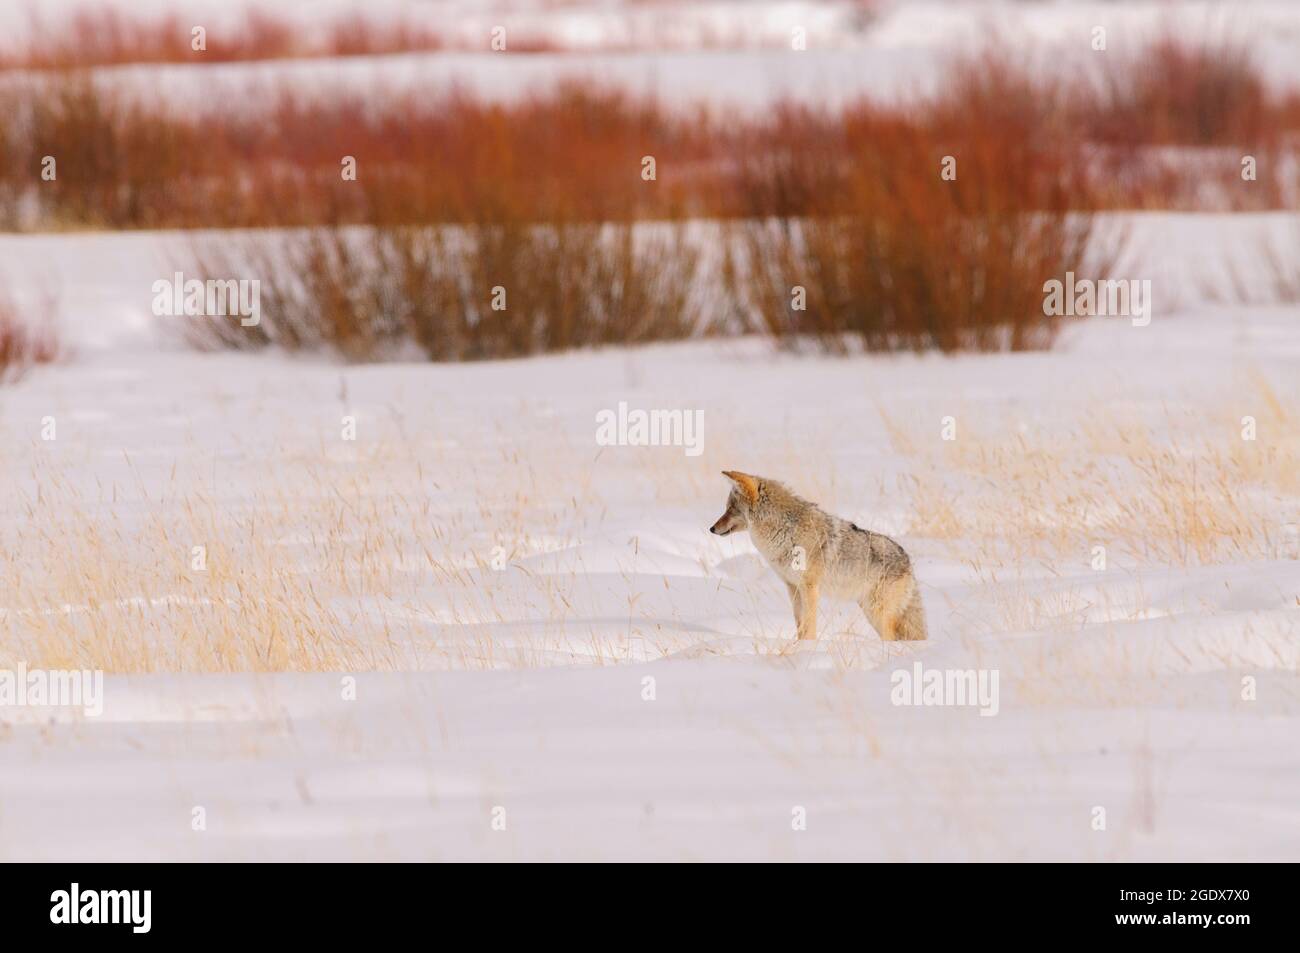 Coyote in a prairie landscape with snow, grasses in warm evening light. Stock Photo